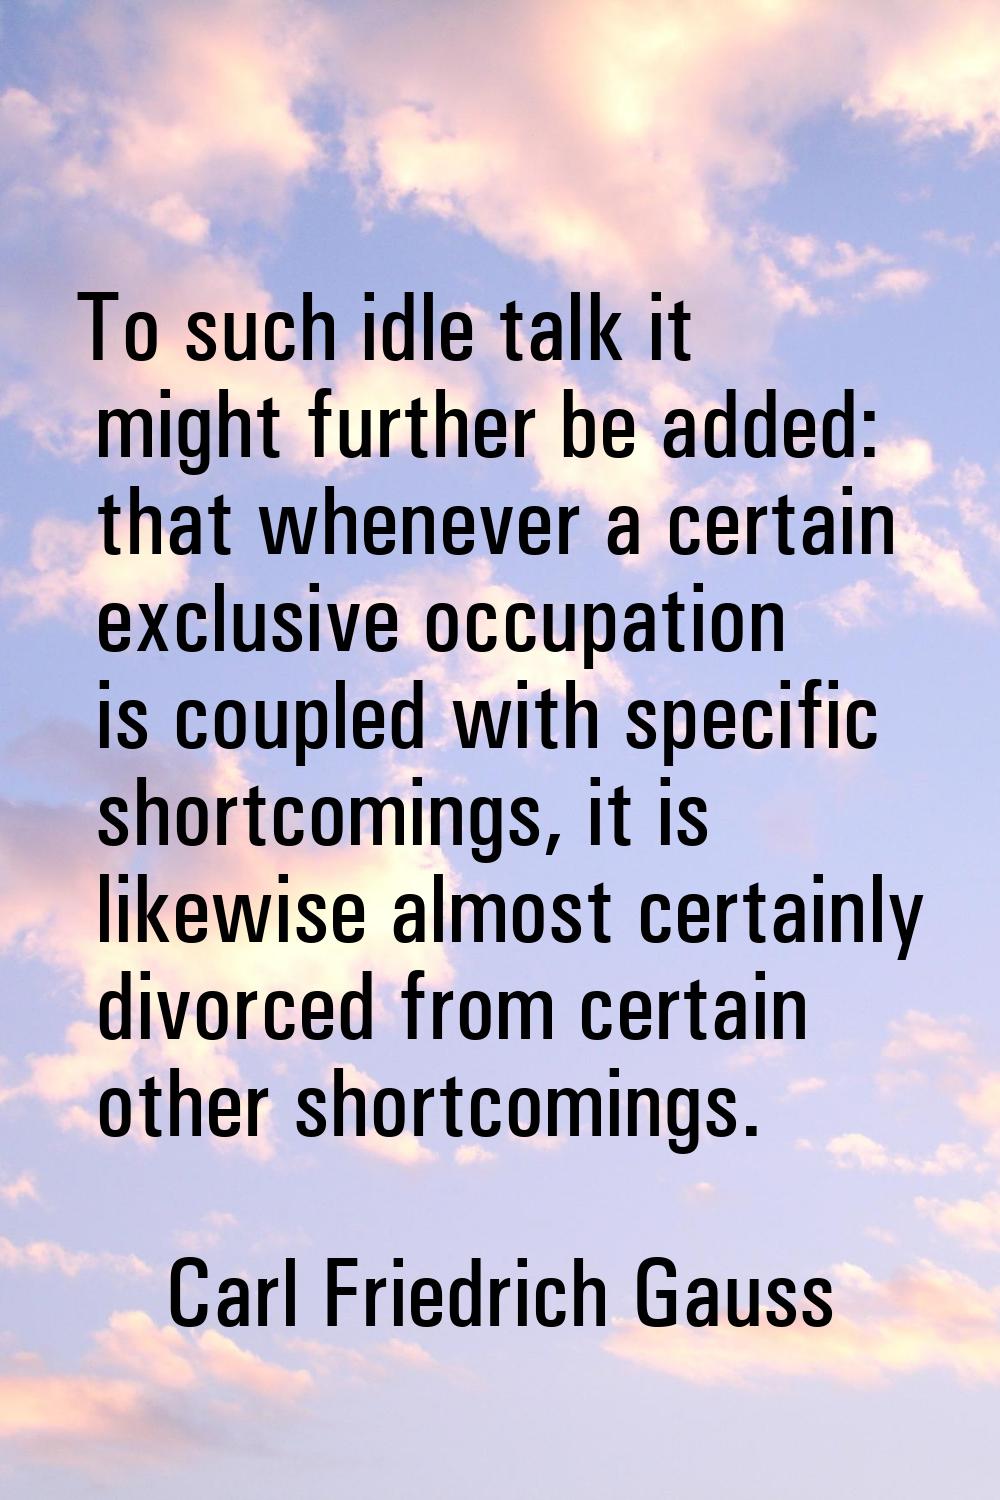 To such idle talk it might further be added: that whenever a certain exclusive occupation is couple